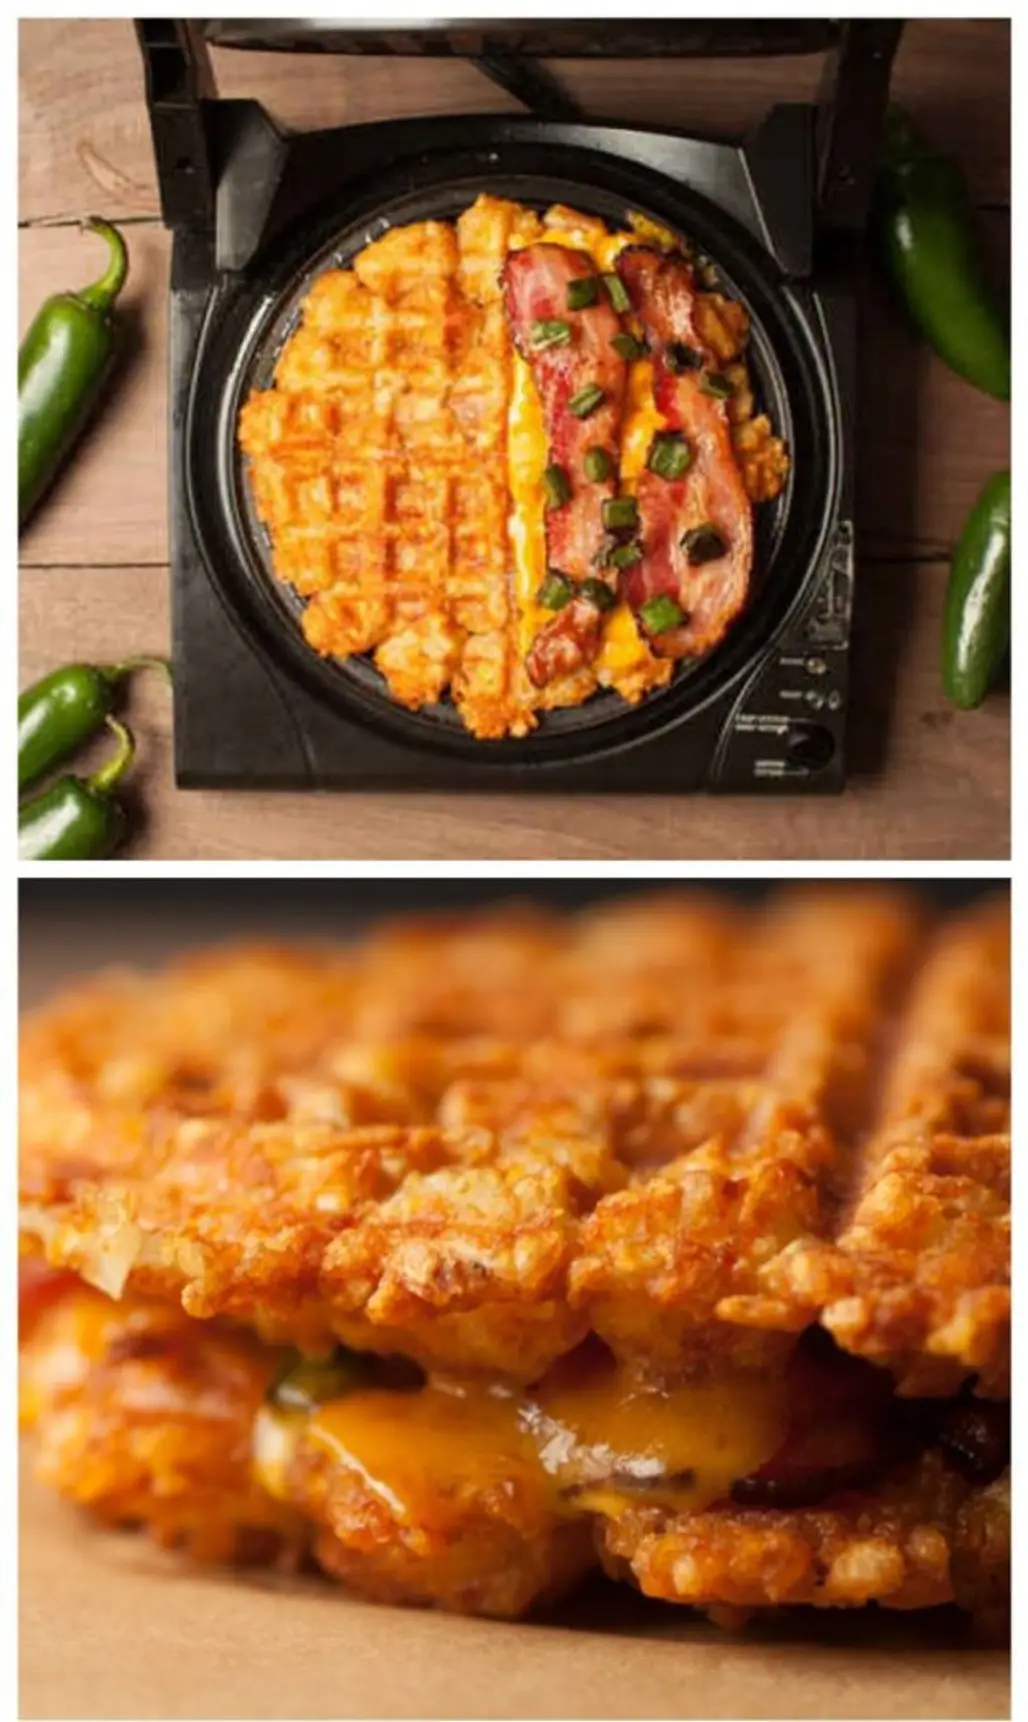 Tater Tot Waffle Grilled Cheese Sandwich